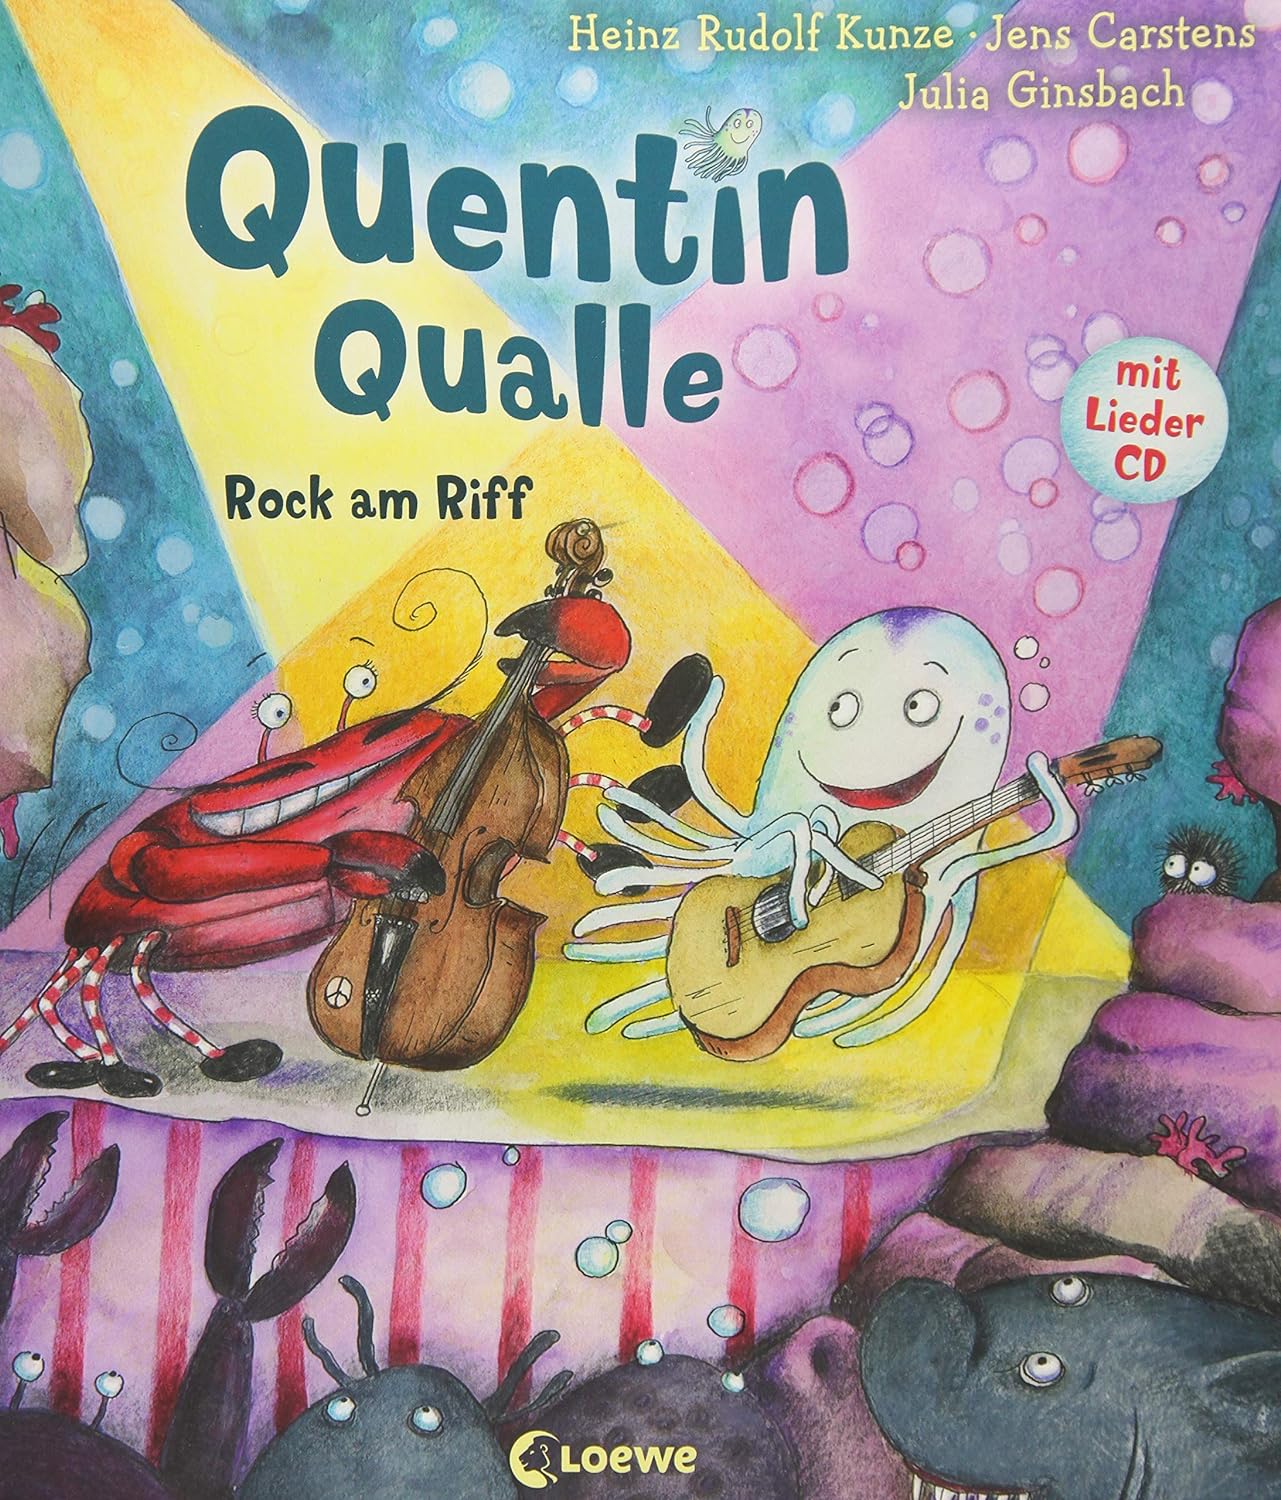 Quentin Qualle Rock am Riff - Loewe